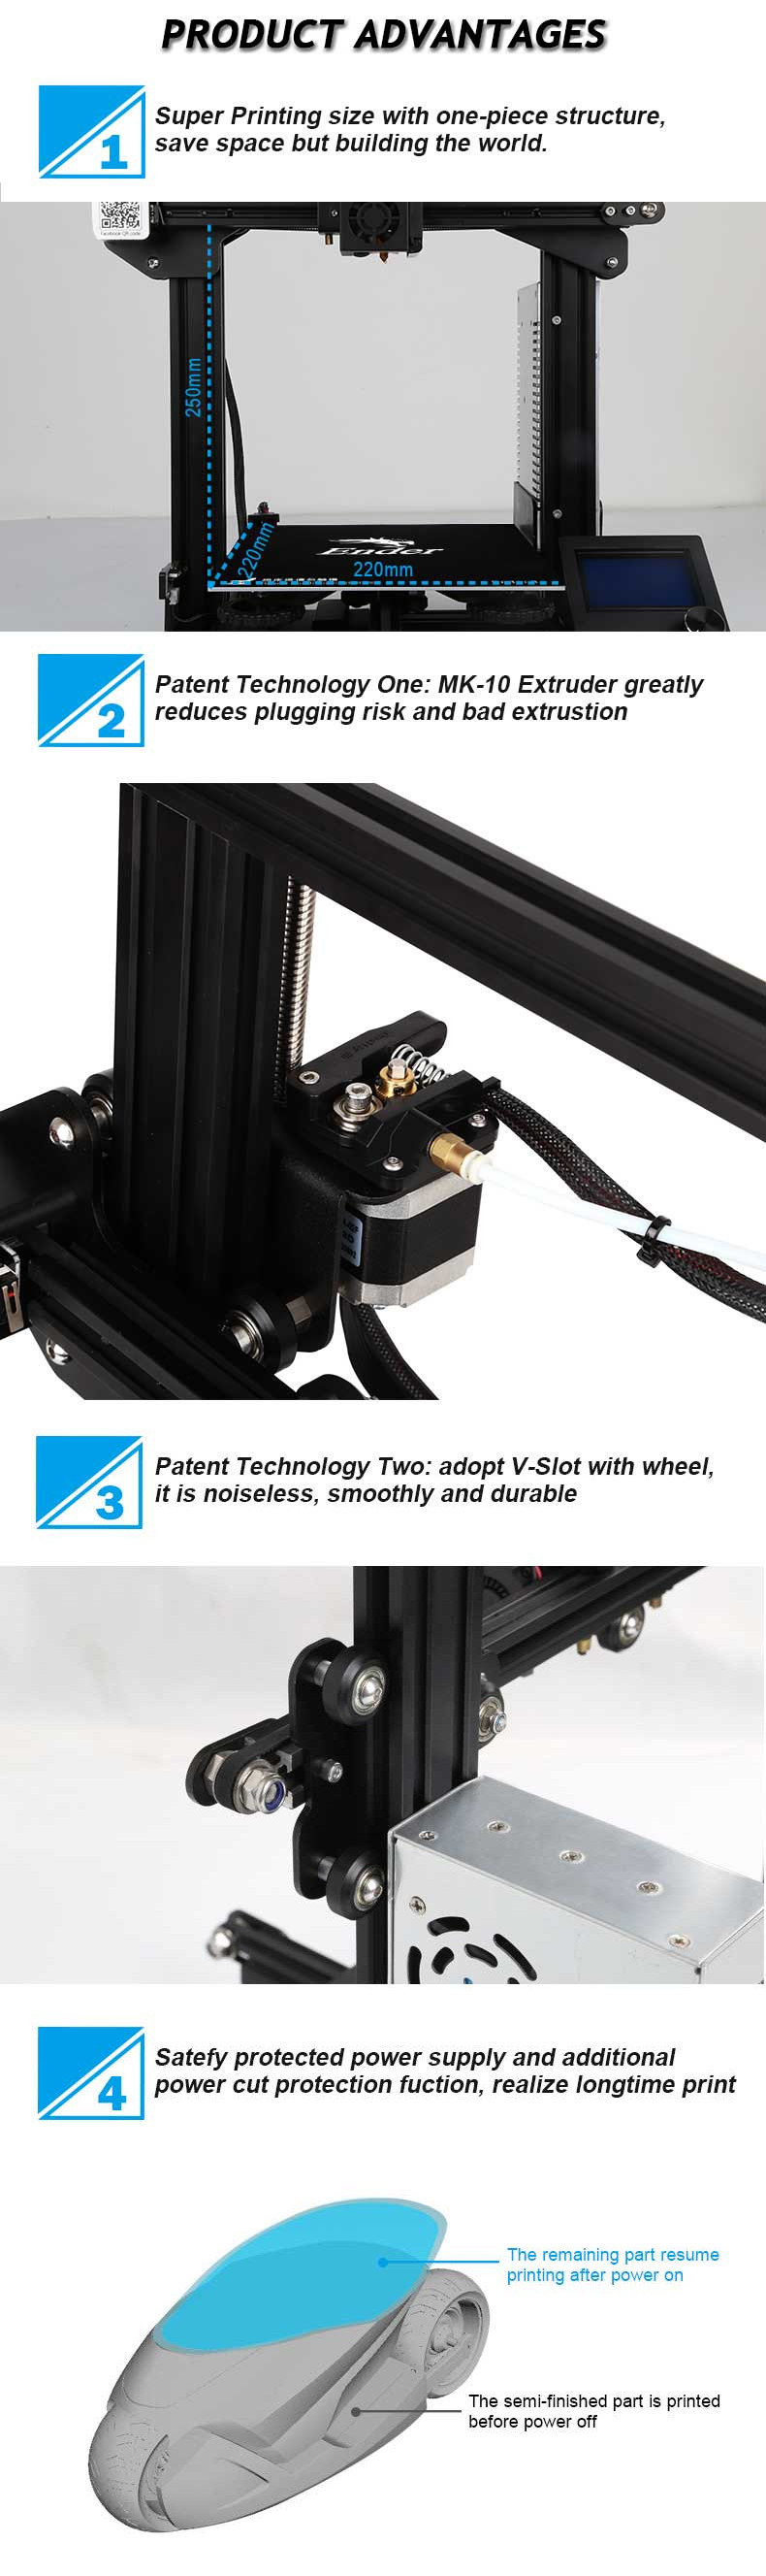 Creality 3D® Ender-3 V-slot Prusa I3 DIY 3D Printer Kit 220x220x250mm Printing Size With Power Resume Function/MK10 Extruder 1.75mm 0.4mm Nozzle 5